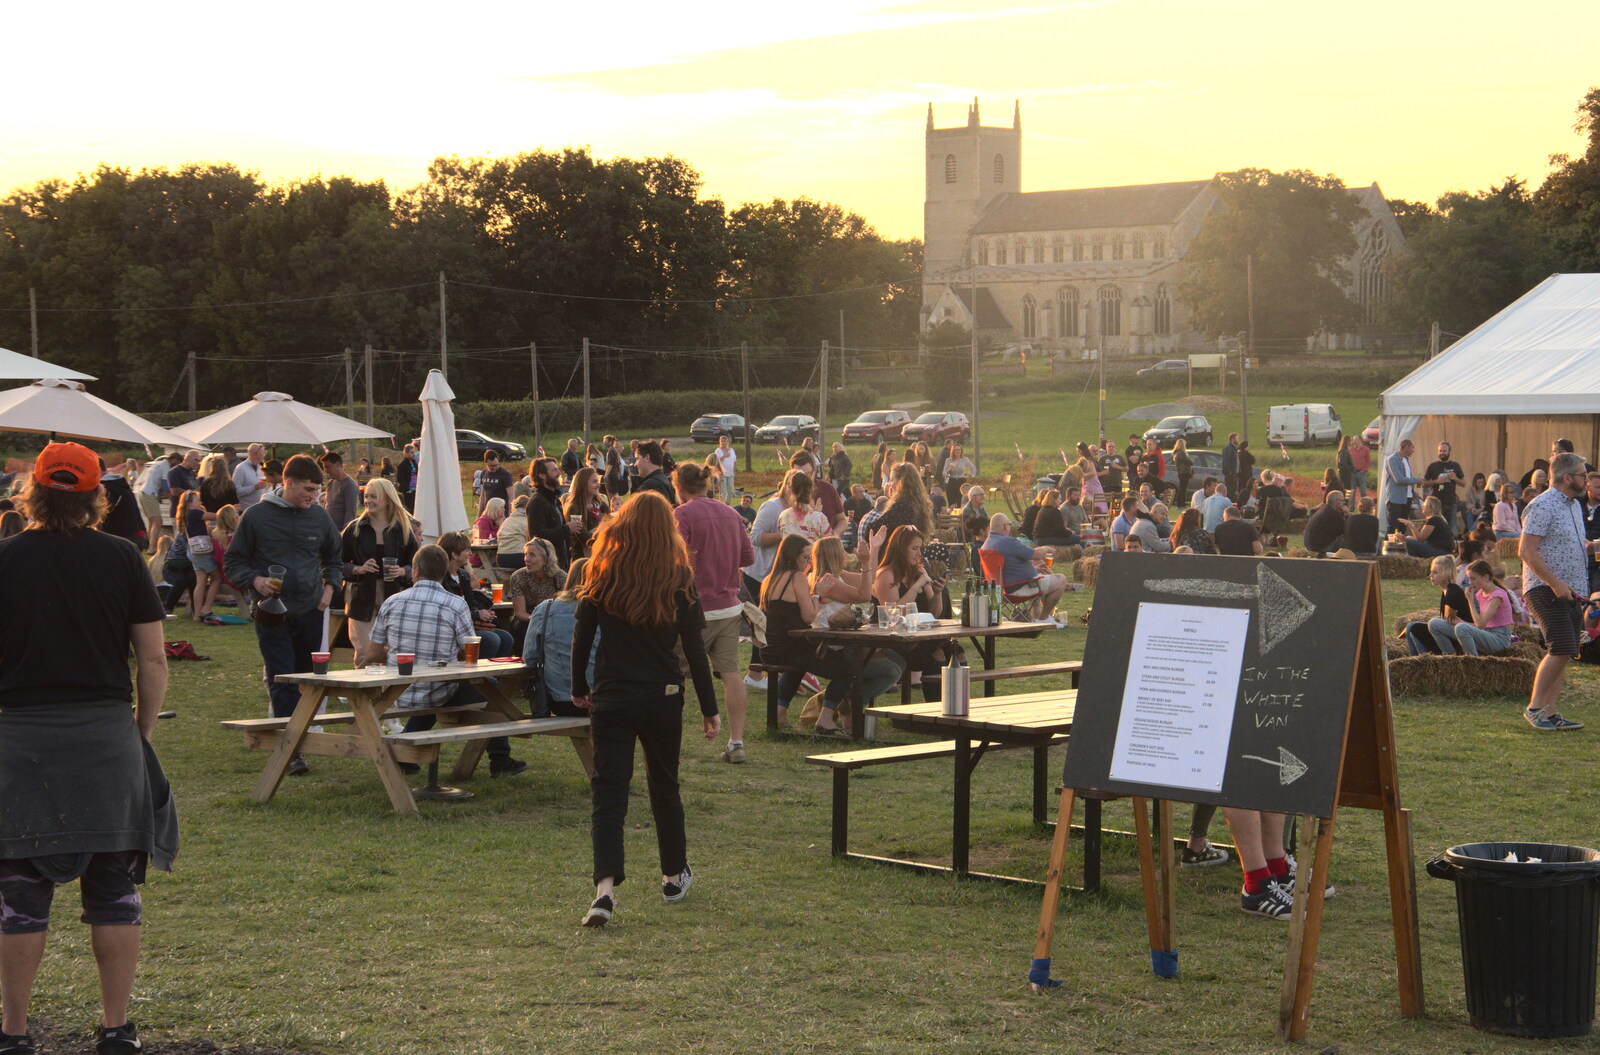 The scene in the low sun from Star Wing's Hops and Hogs Festival, Redgrave, Suffolk - 12th September 2020